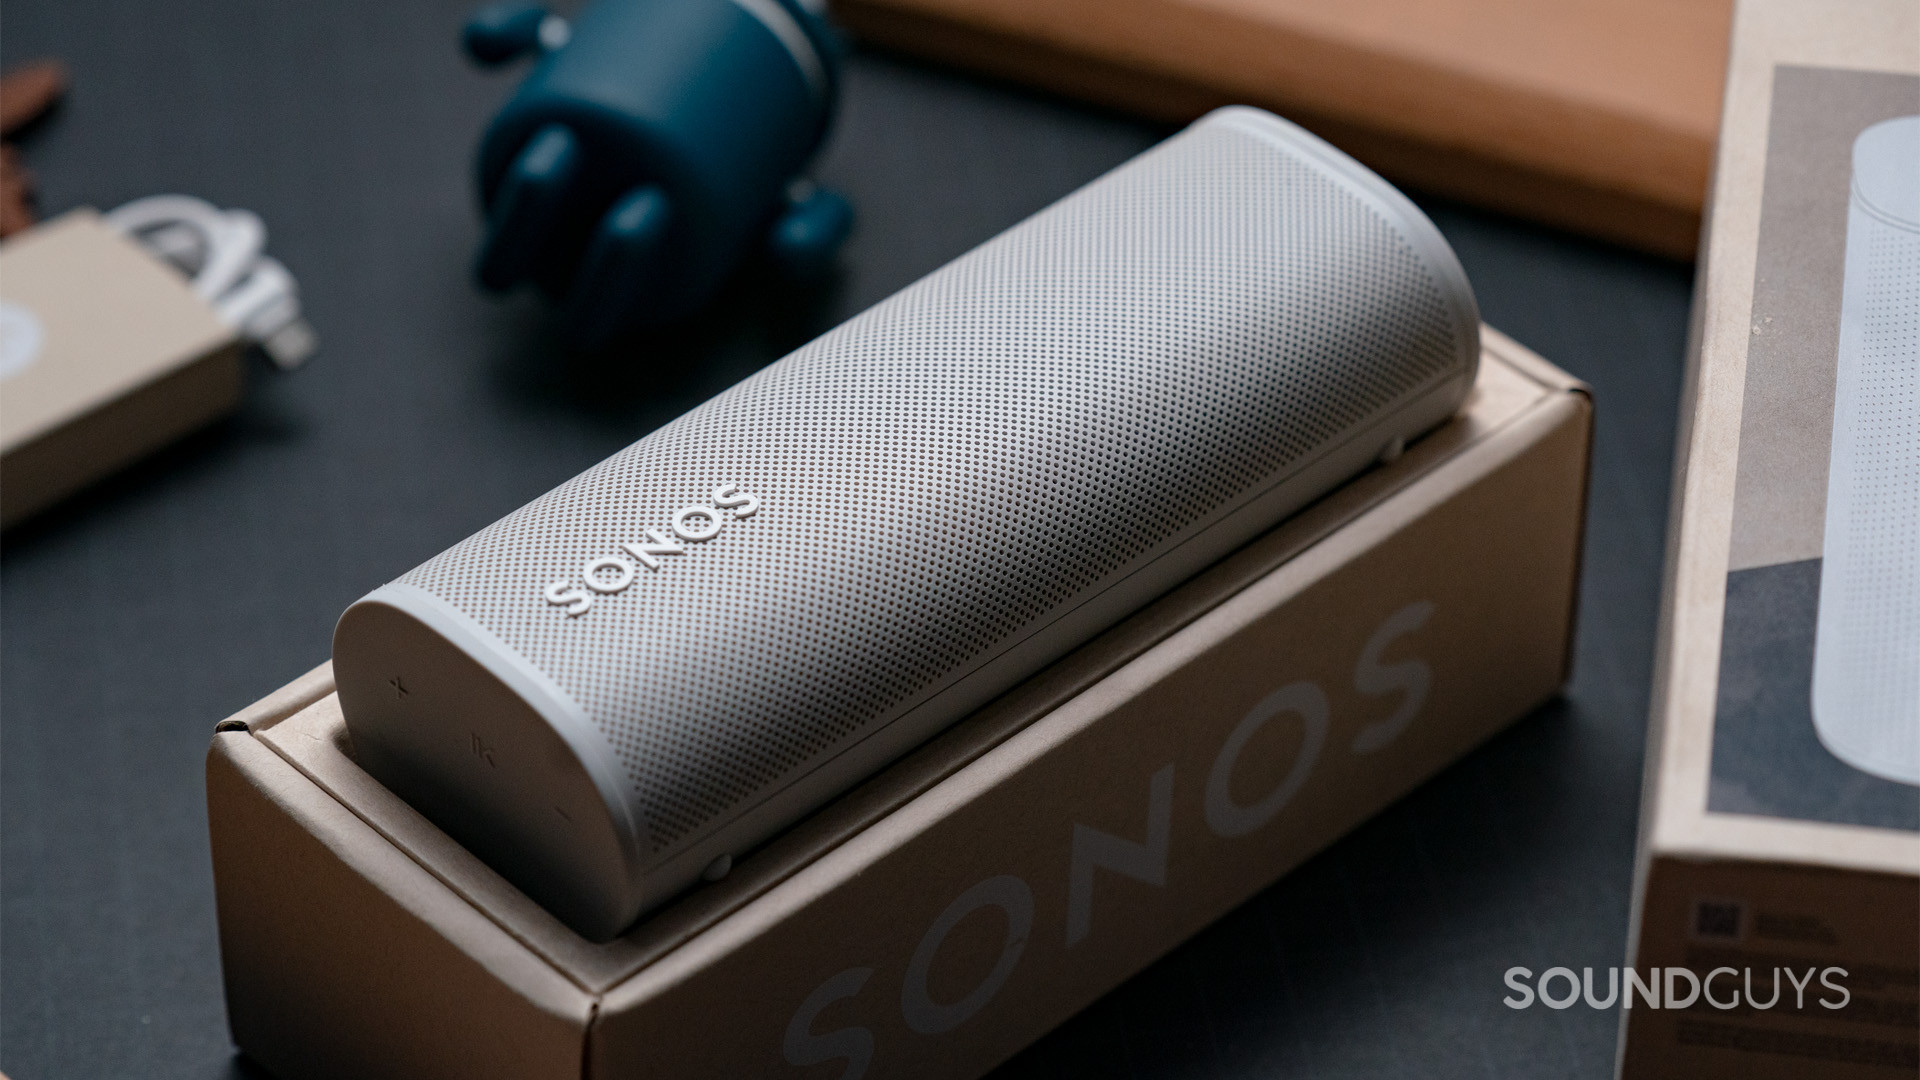 A white Sonos Roam speaker sitting face-up inside of the box it came in.